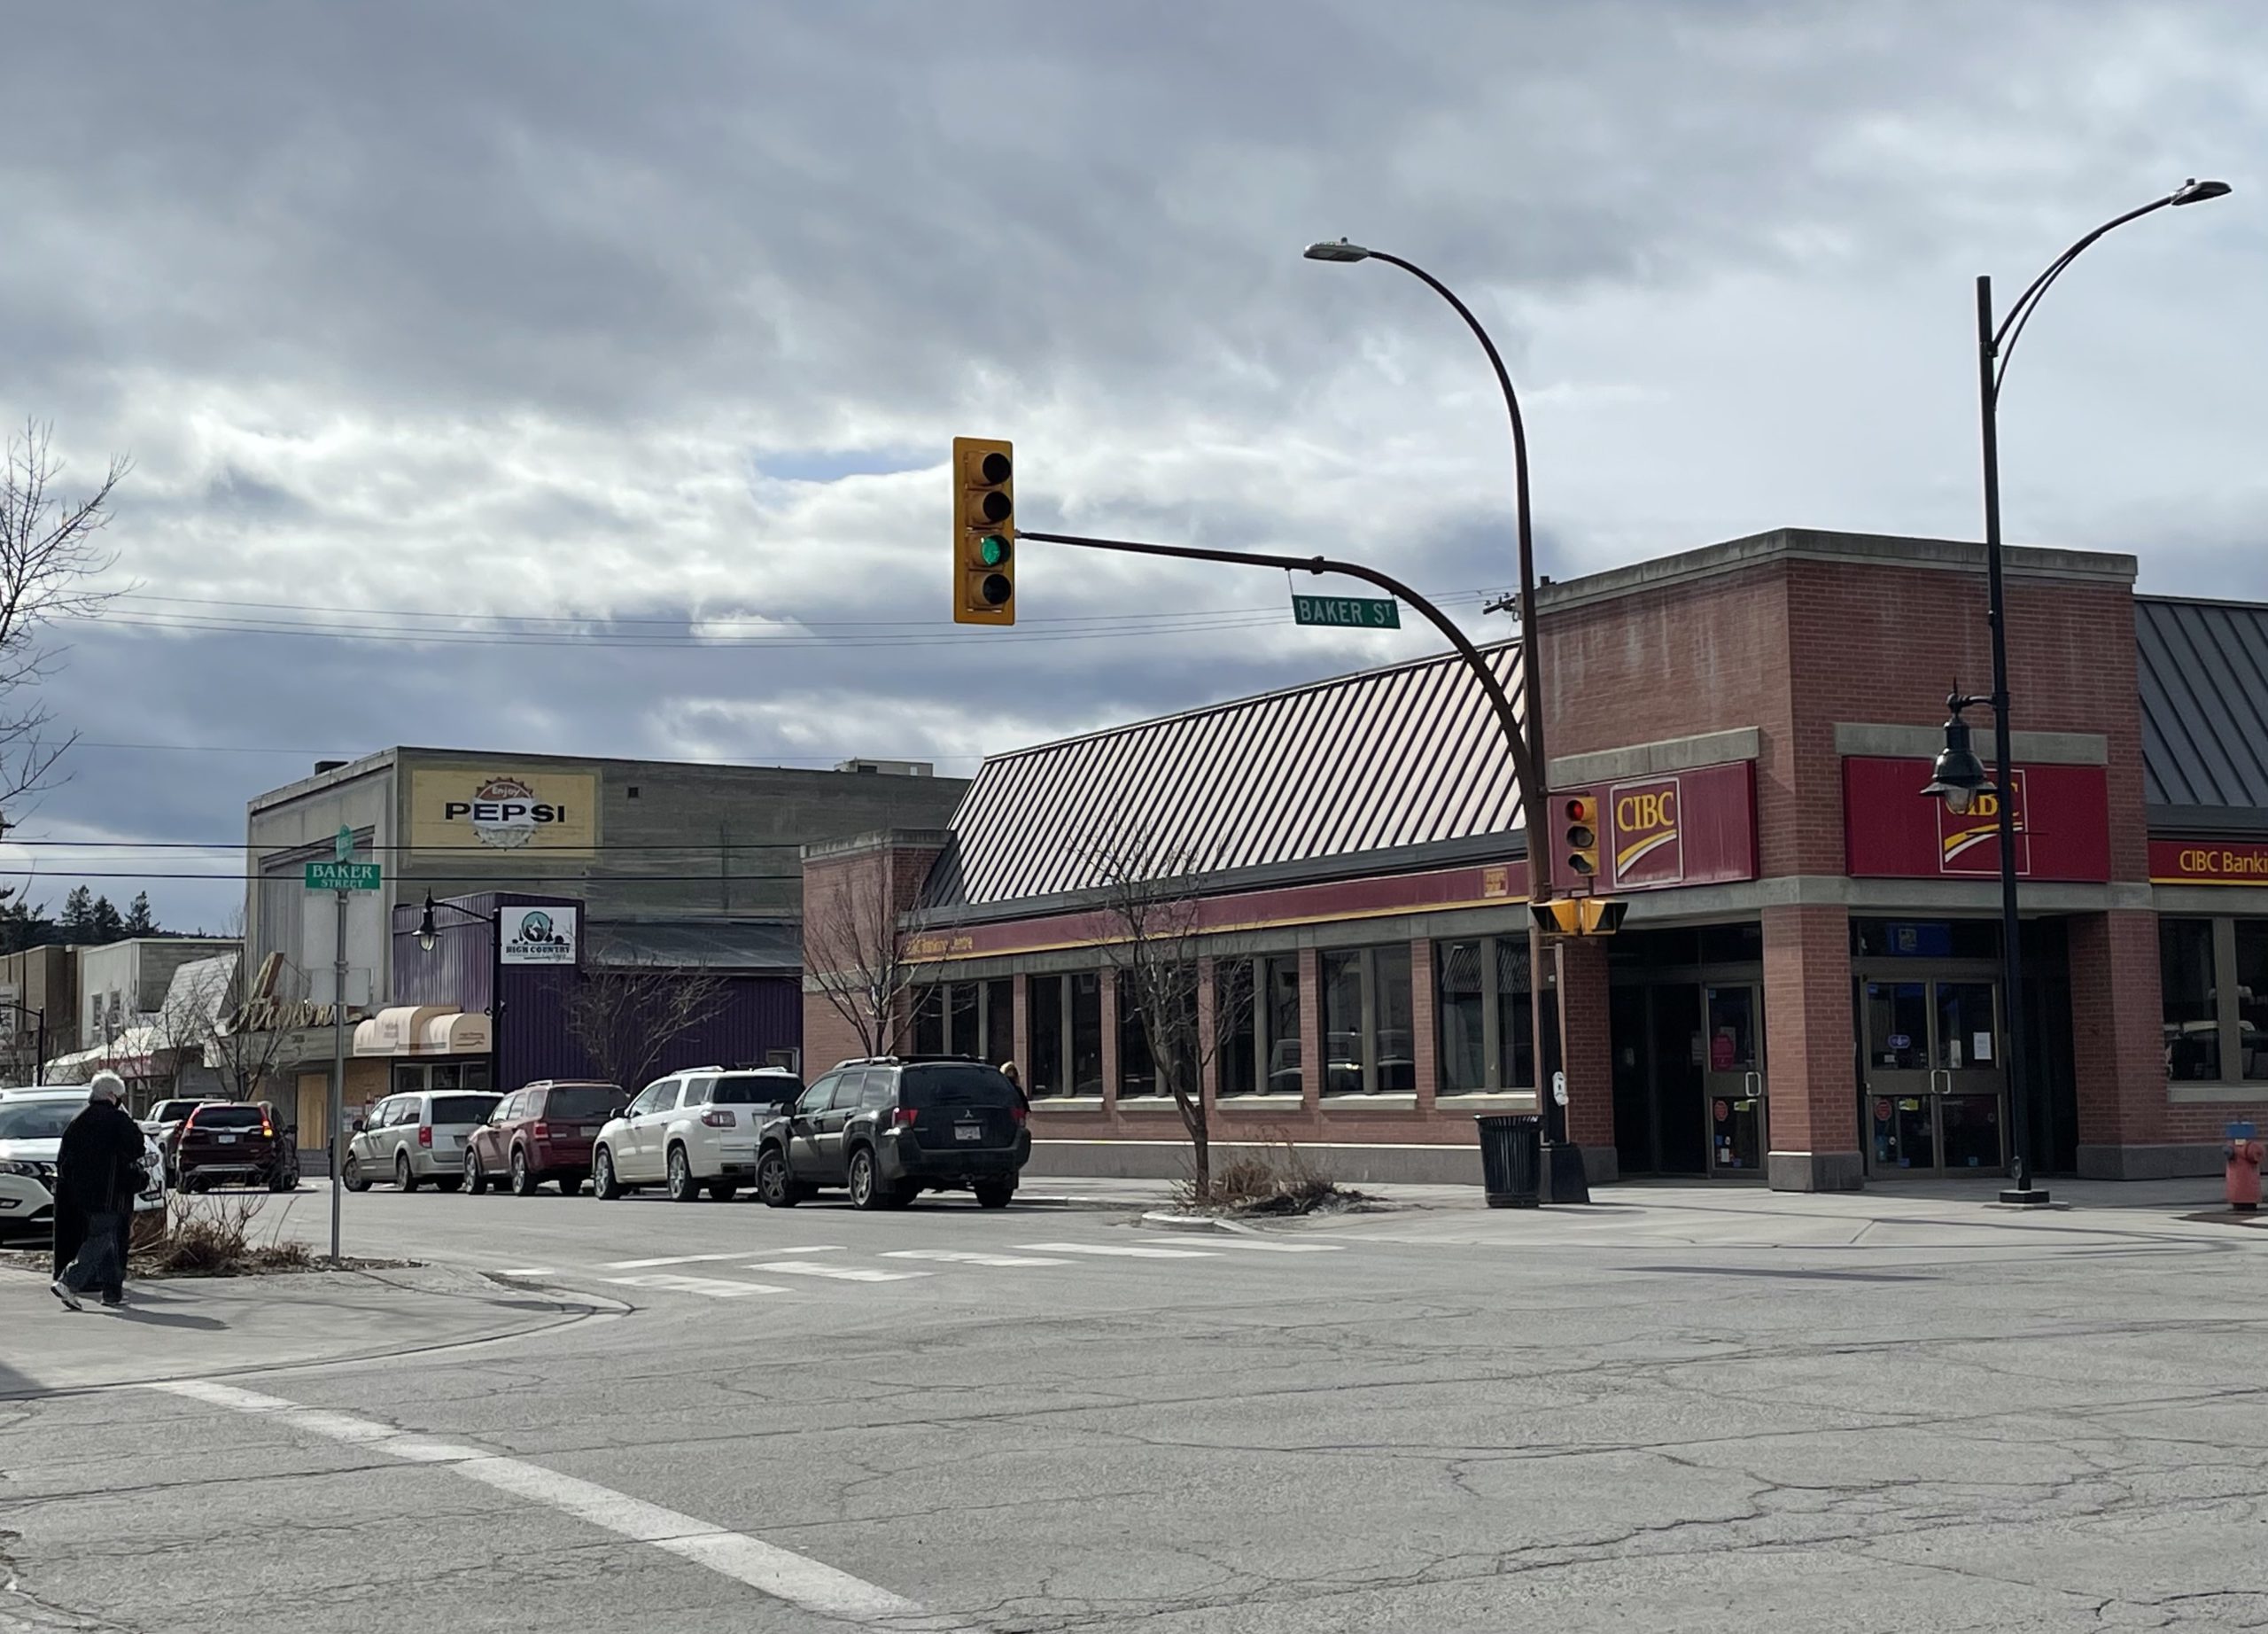 cranbrook-city-council-adopts-new-streets-traffic-and-parking-bylaw-my-east-kootenay-now